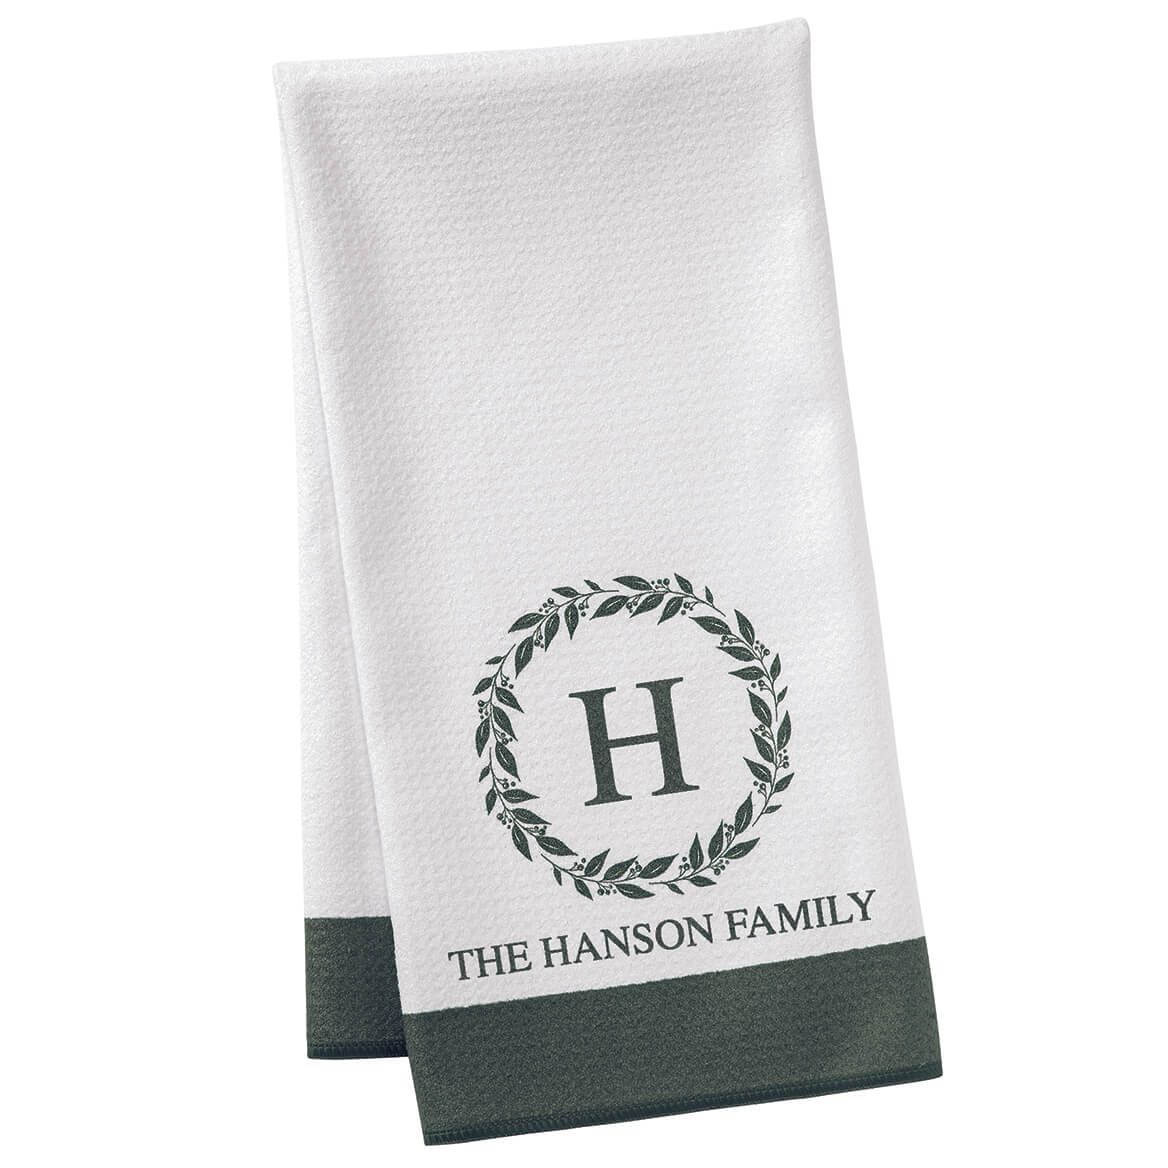 Personalized Monogram Wreath Towel by Home Marketplace + '-' + 376605